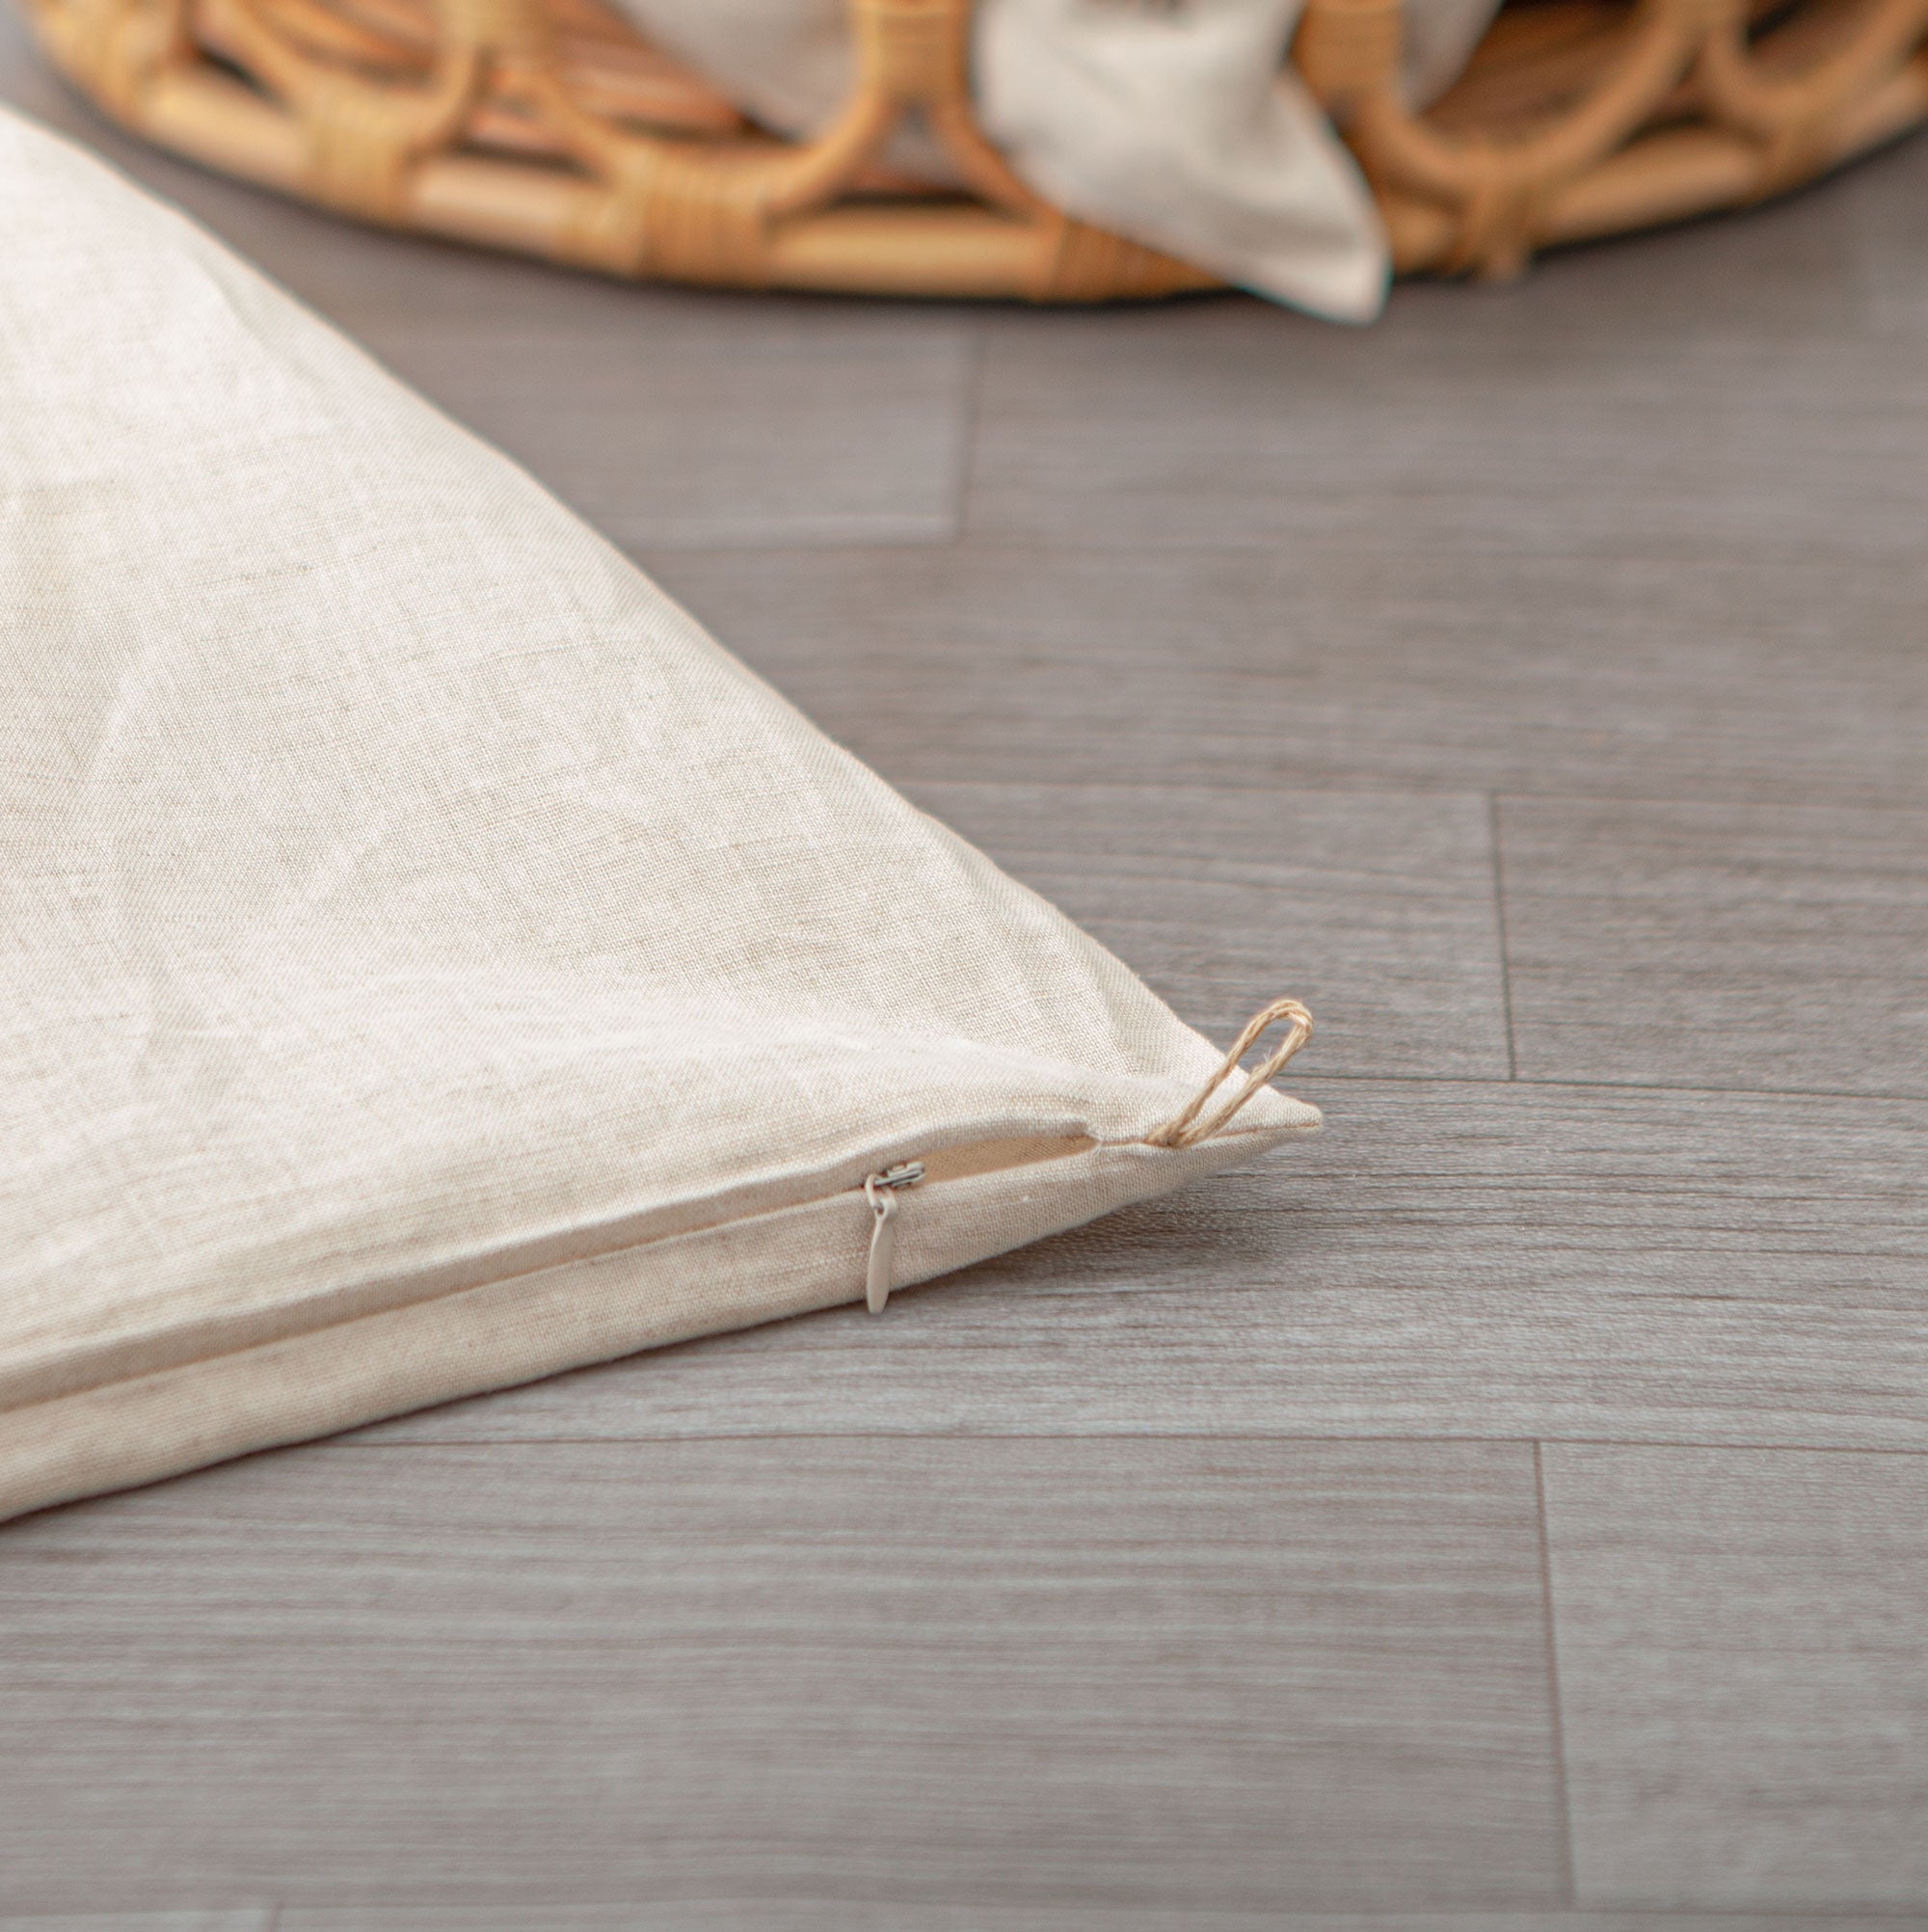 Oatmeal Natural Linen Laundry Bag (pack of 3)